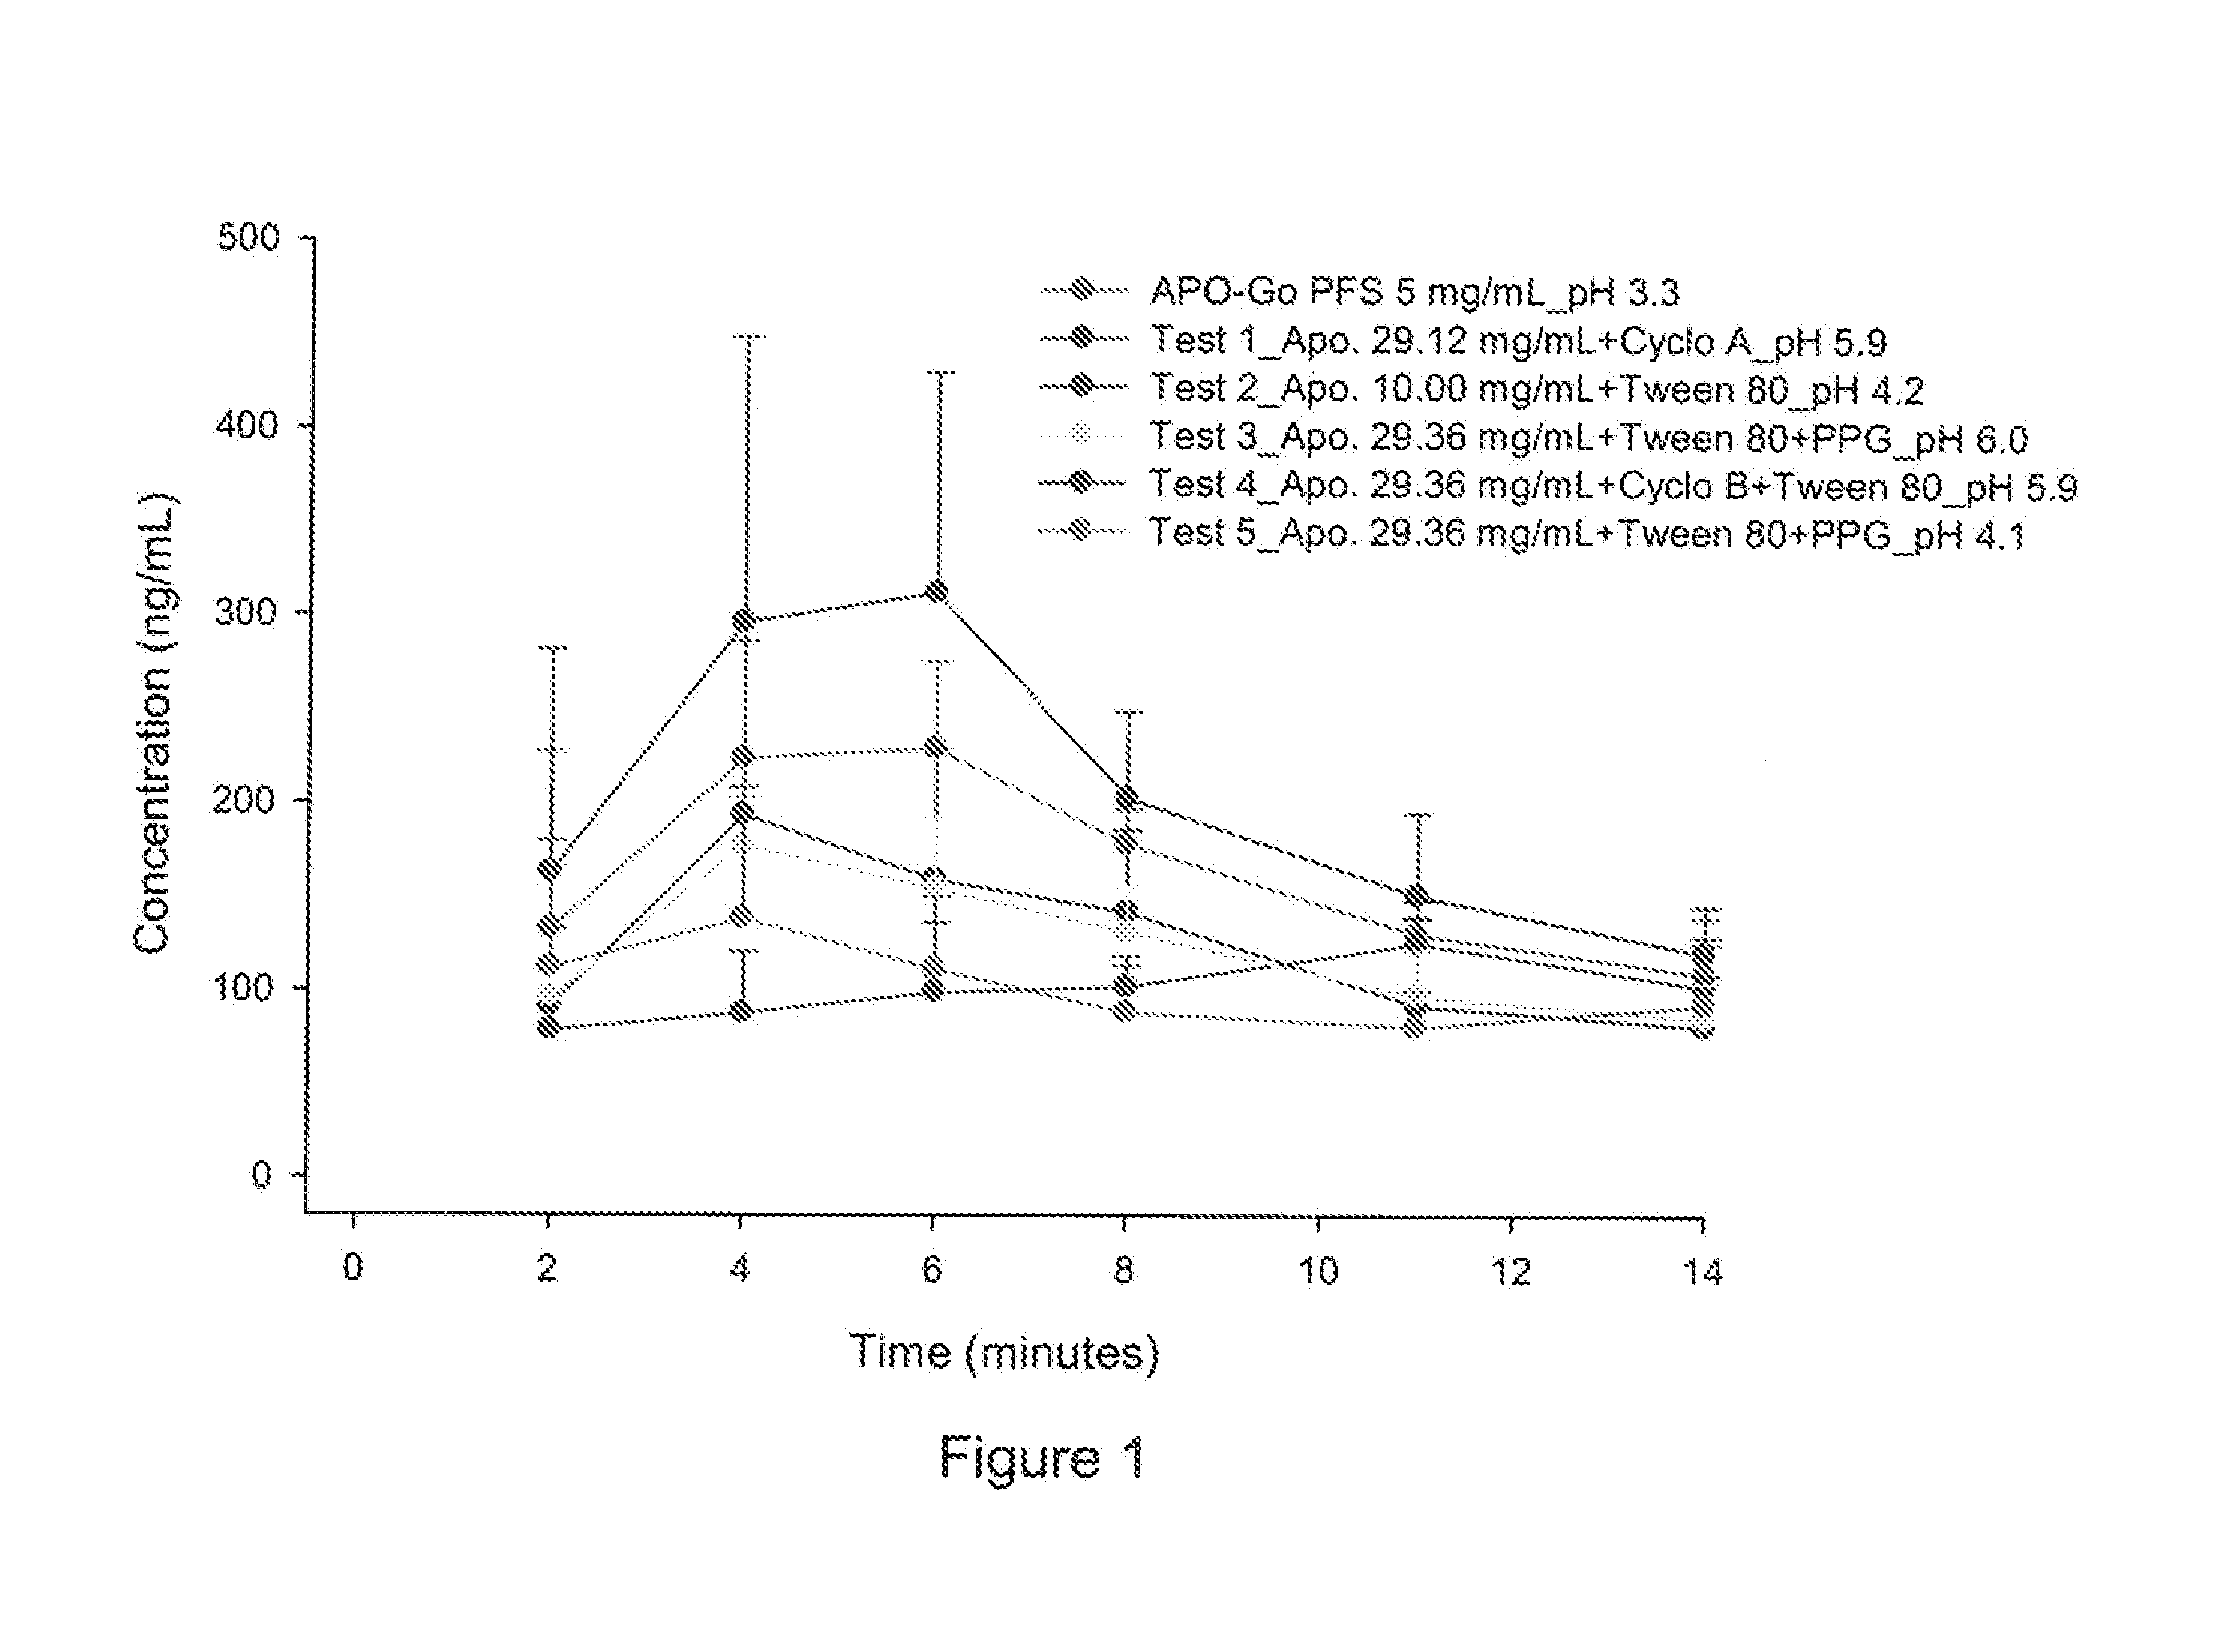 New therapeutical composition containing apomorphine as active ingredient